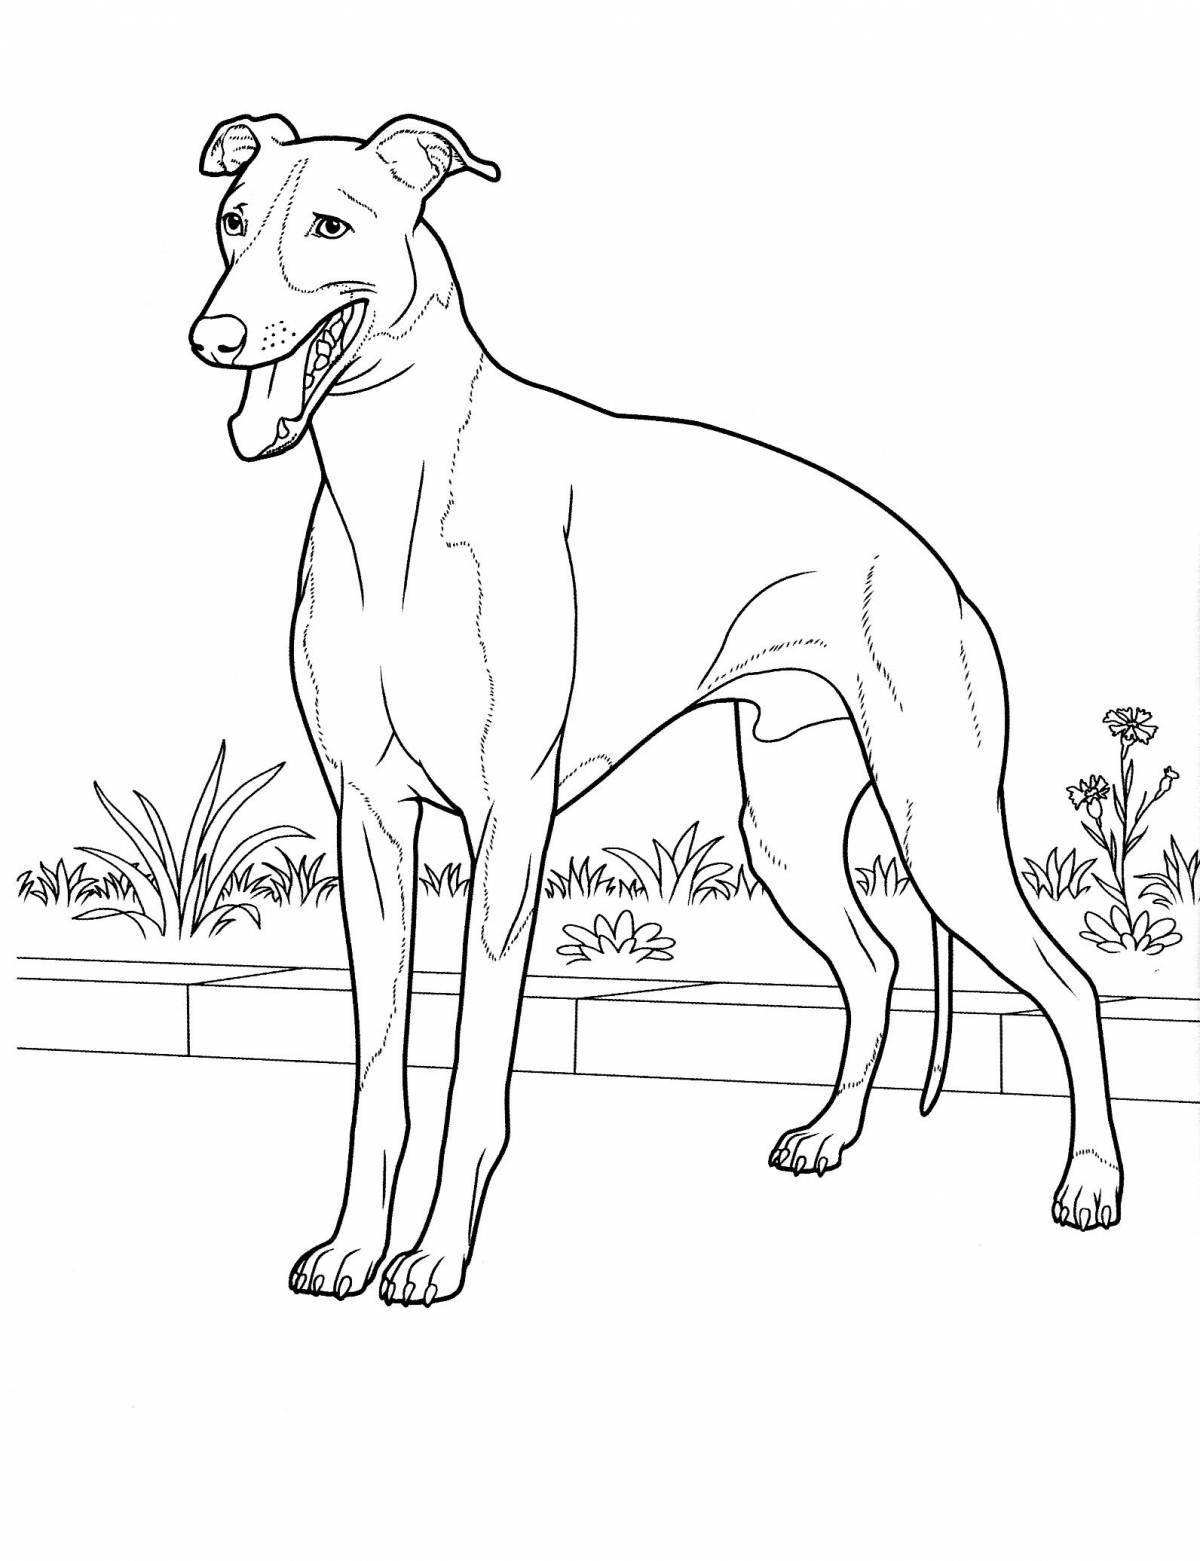 Awesome doberman coloring page